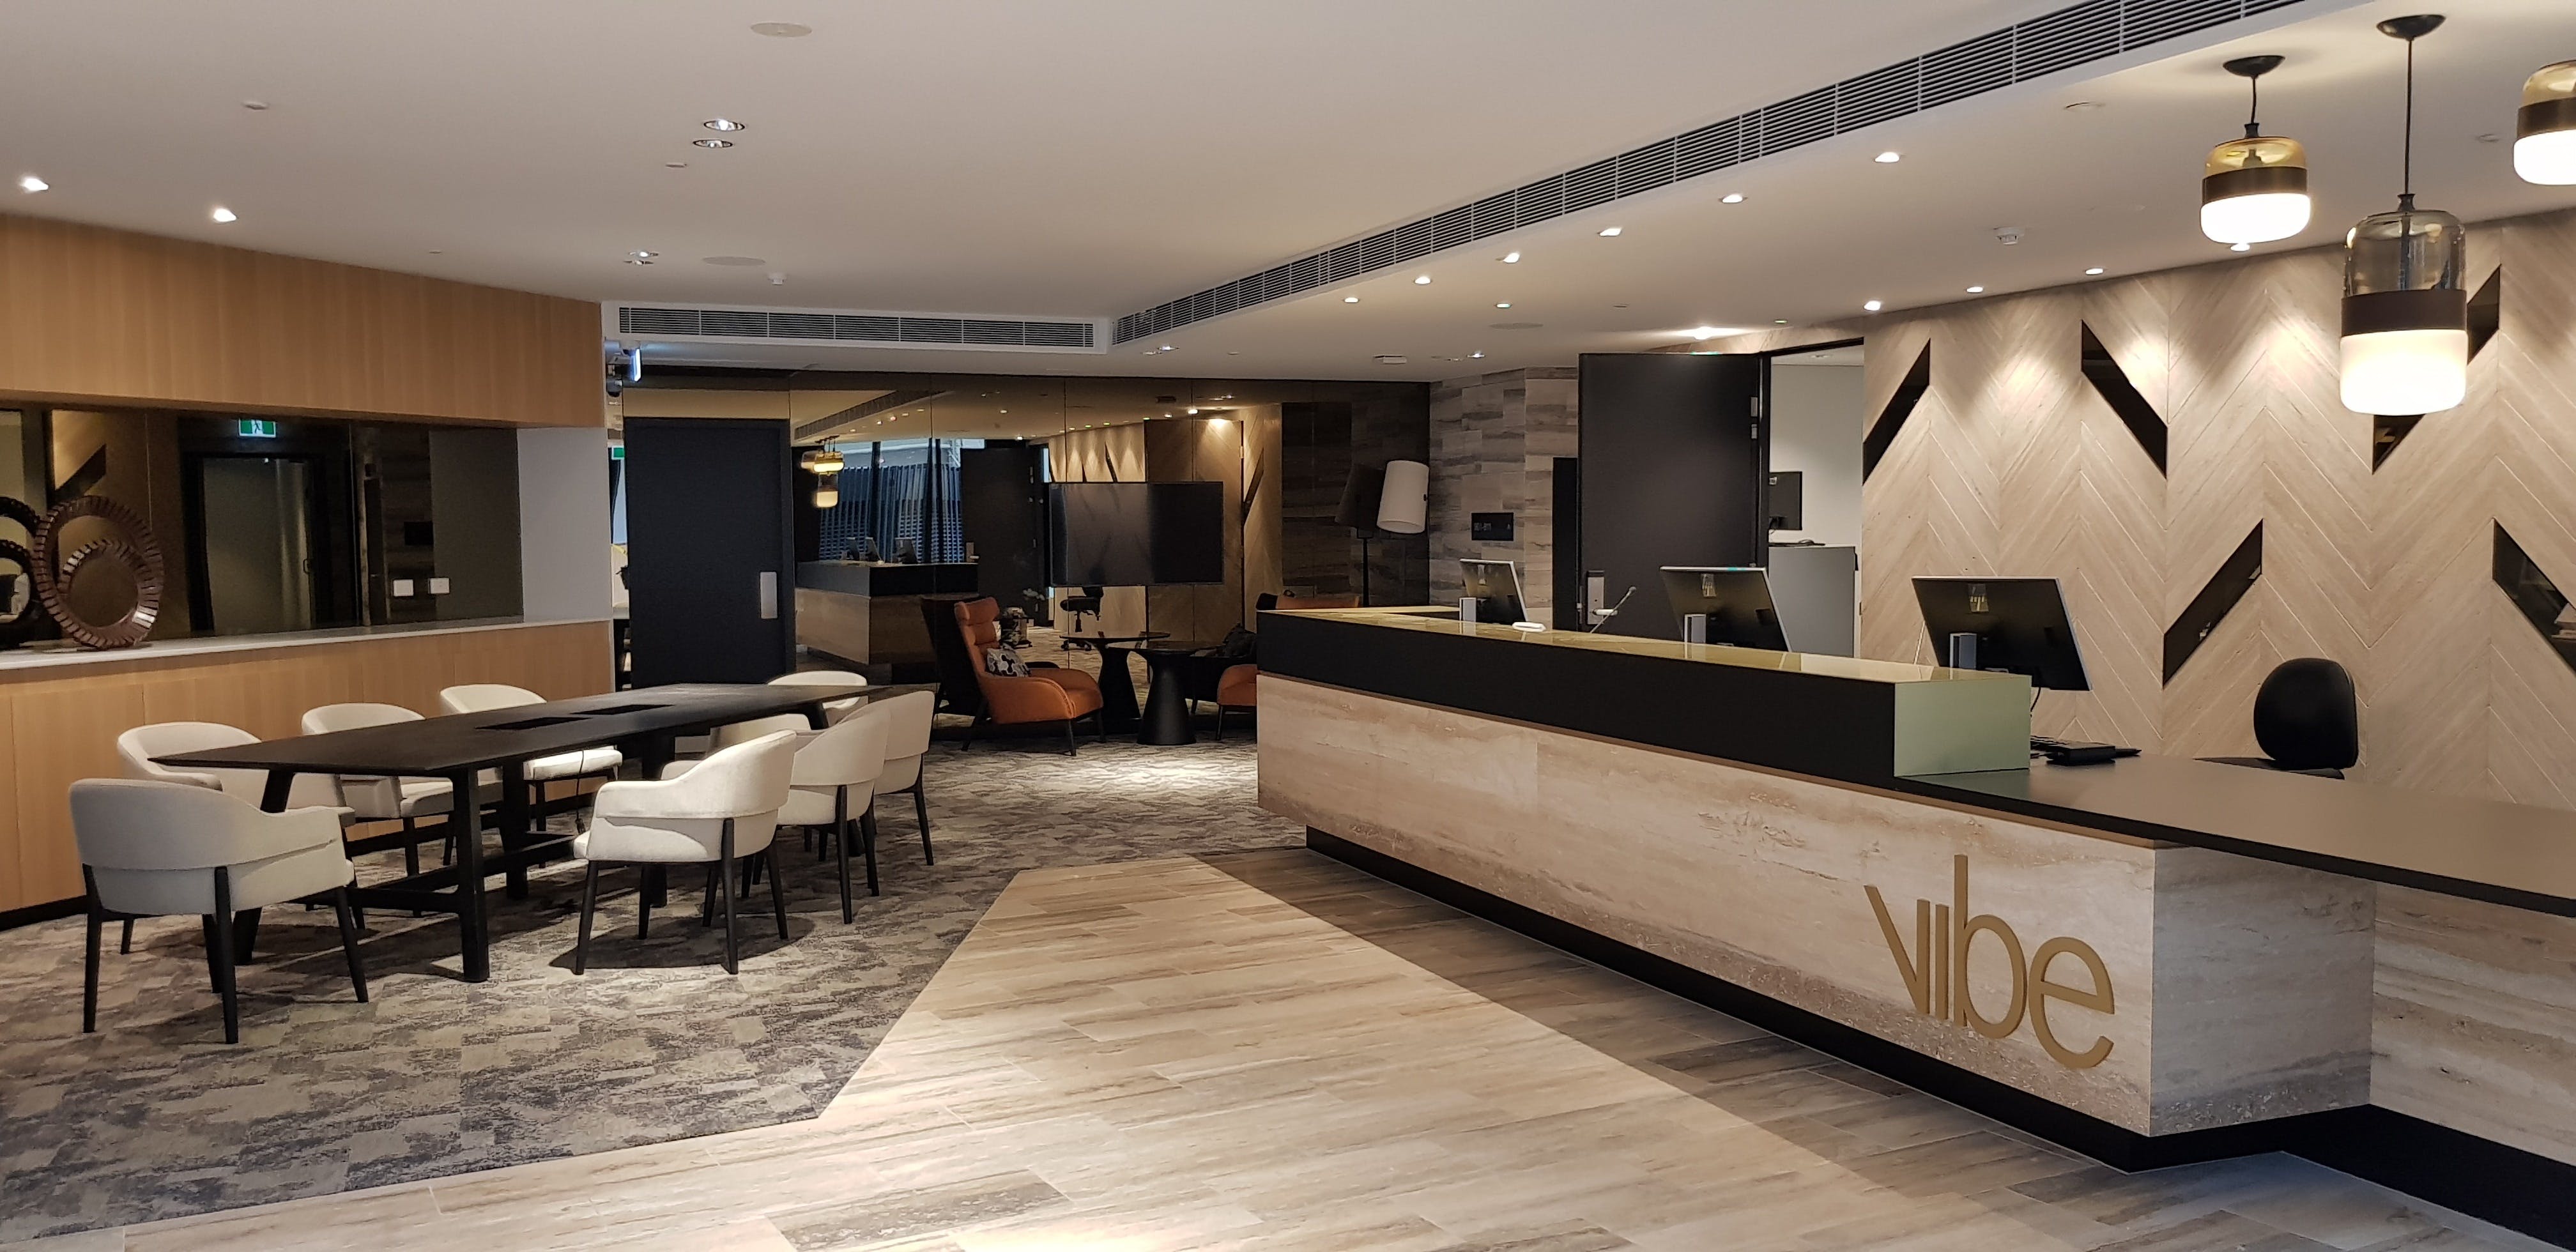 Vibe Hotel North Sydney - Coogee Beach Accommodation